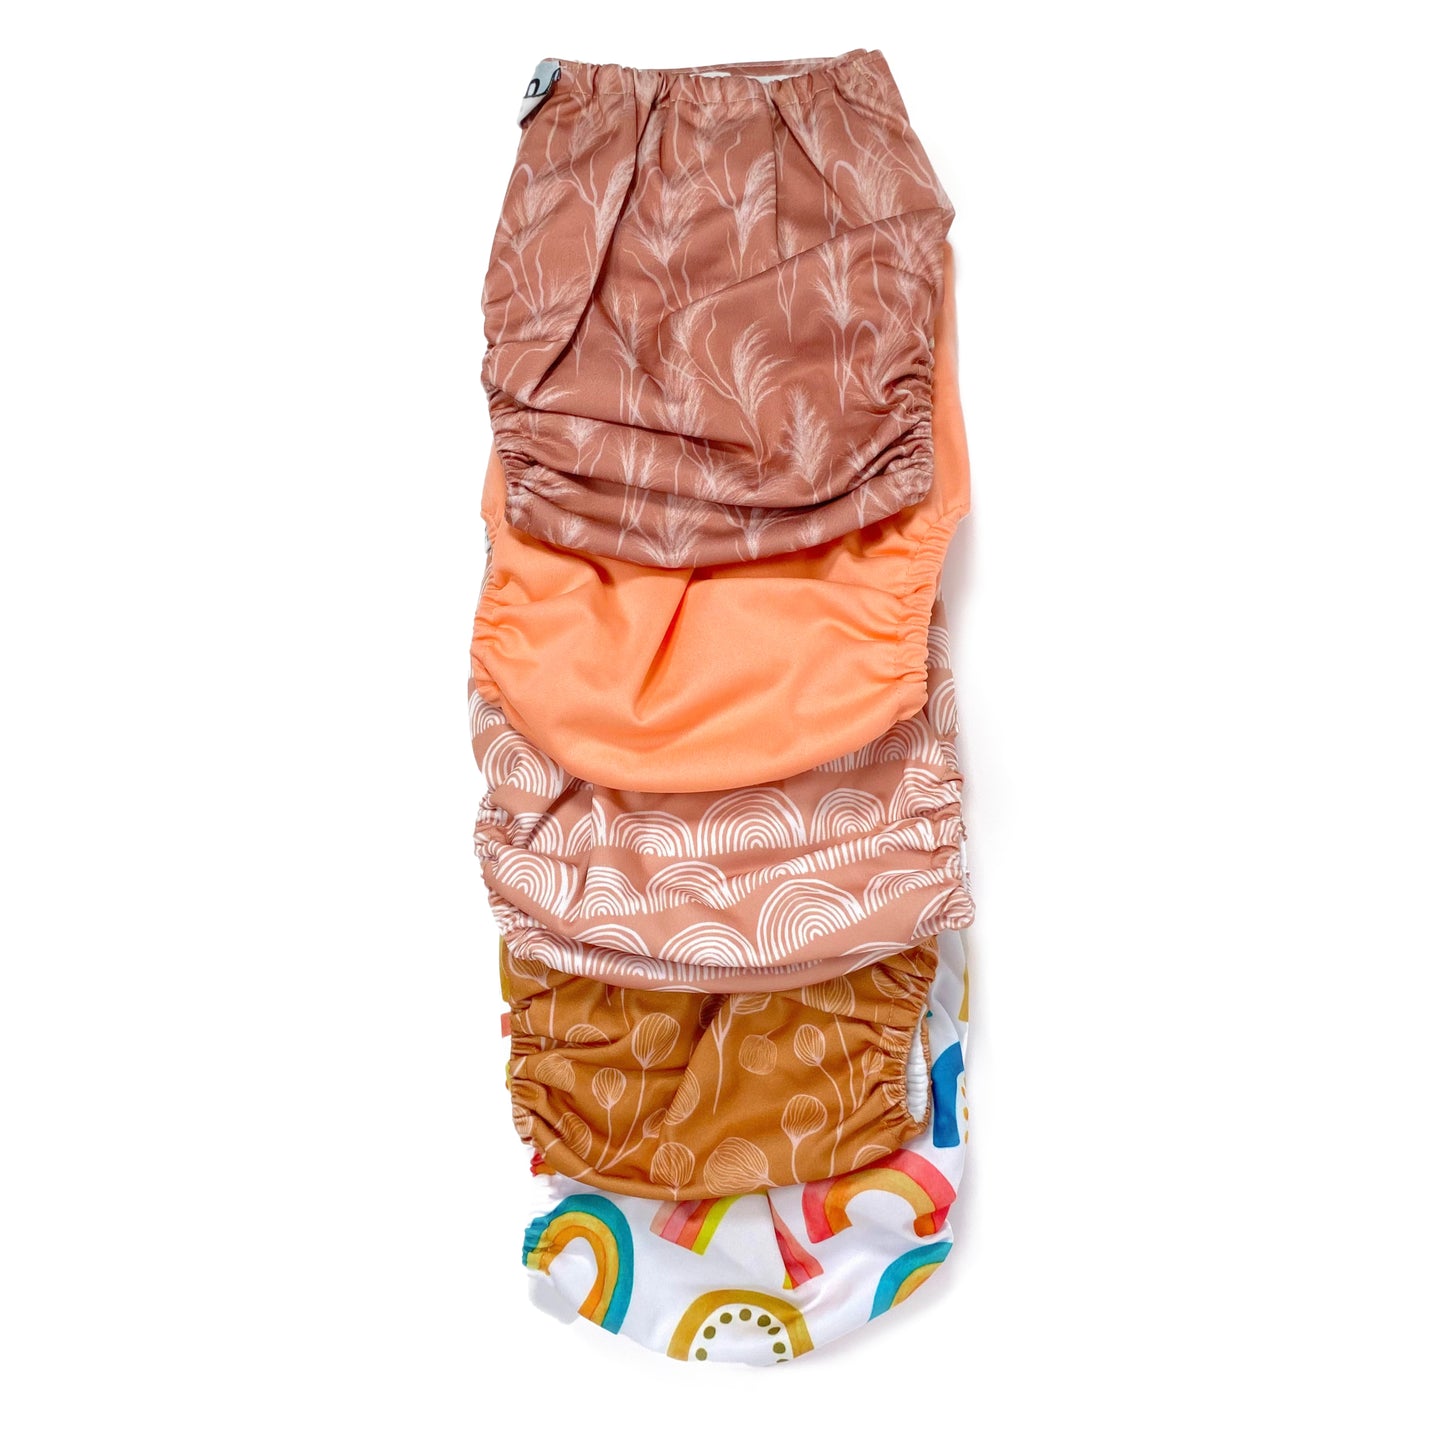 A set of five reusable nappies, made from 100% recycled polyester. The included nappies are: Bright Rainbow, Copper Bloom, Peach Rainbow, Cute Coral and Sunset Dune. View shows all five nappies back facing, in a vertical line.